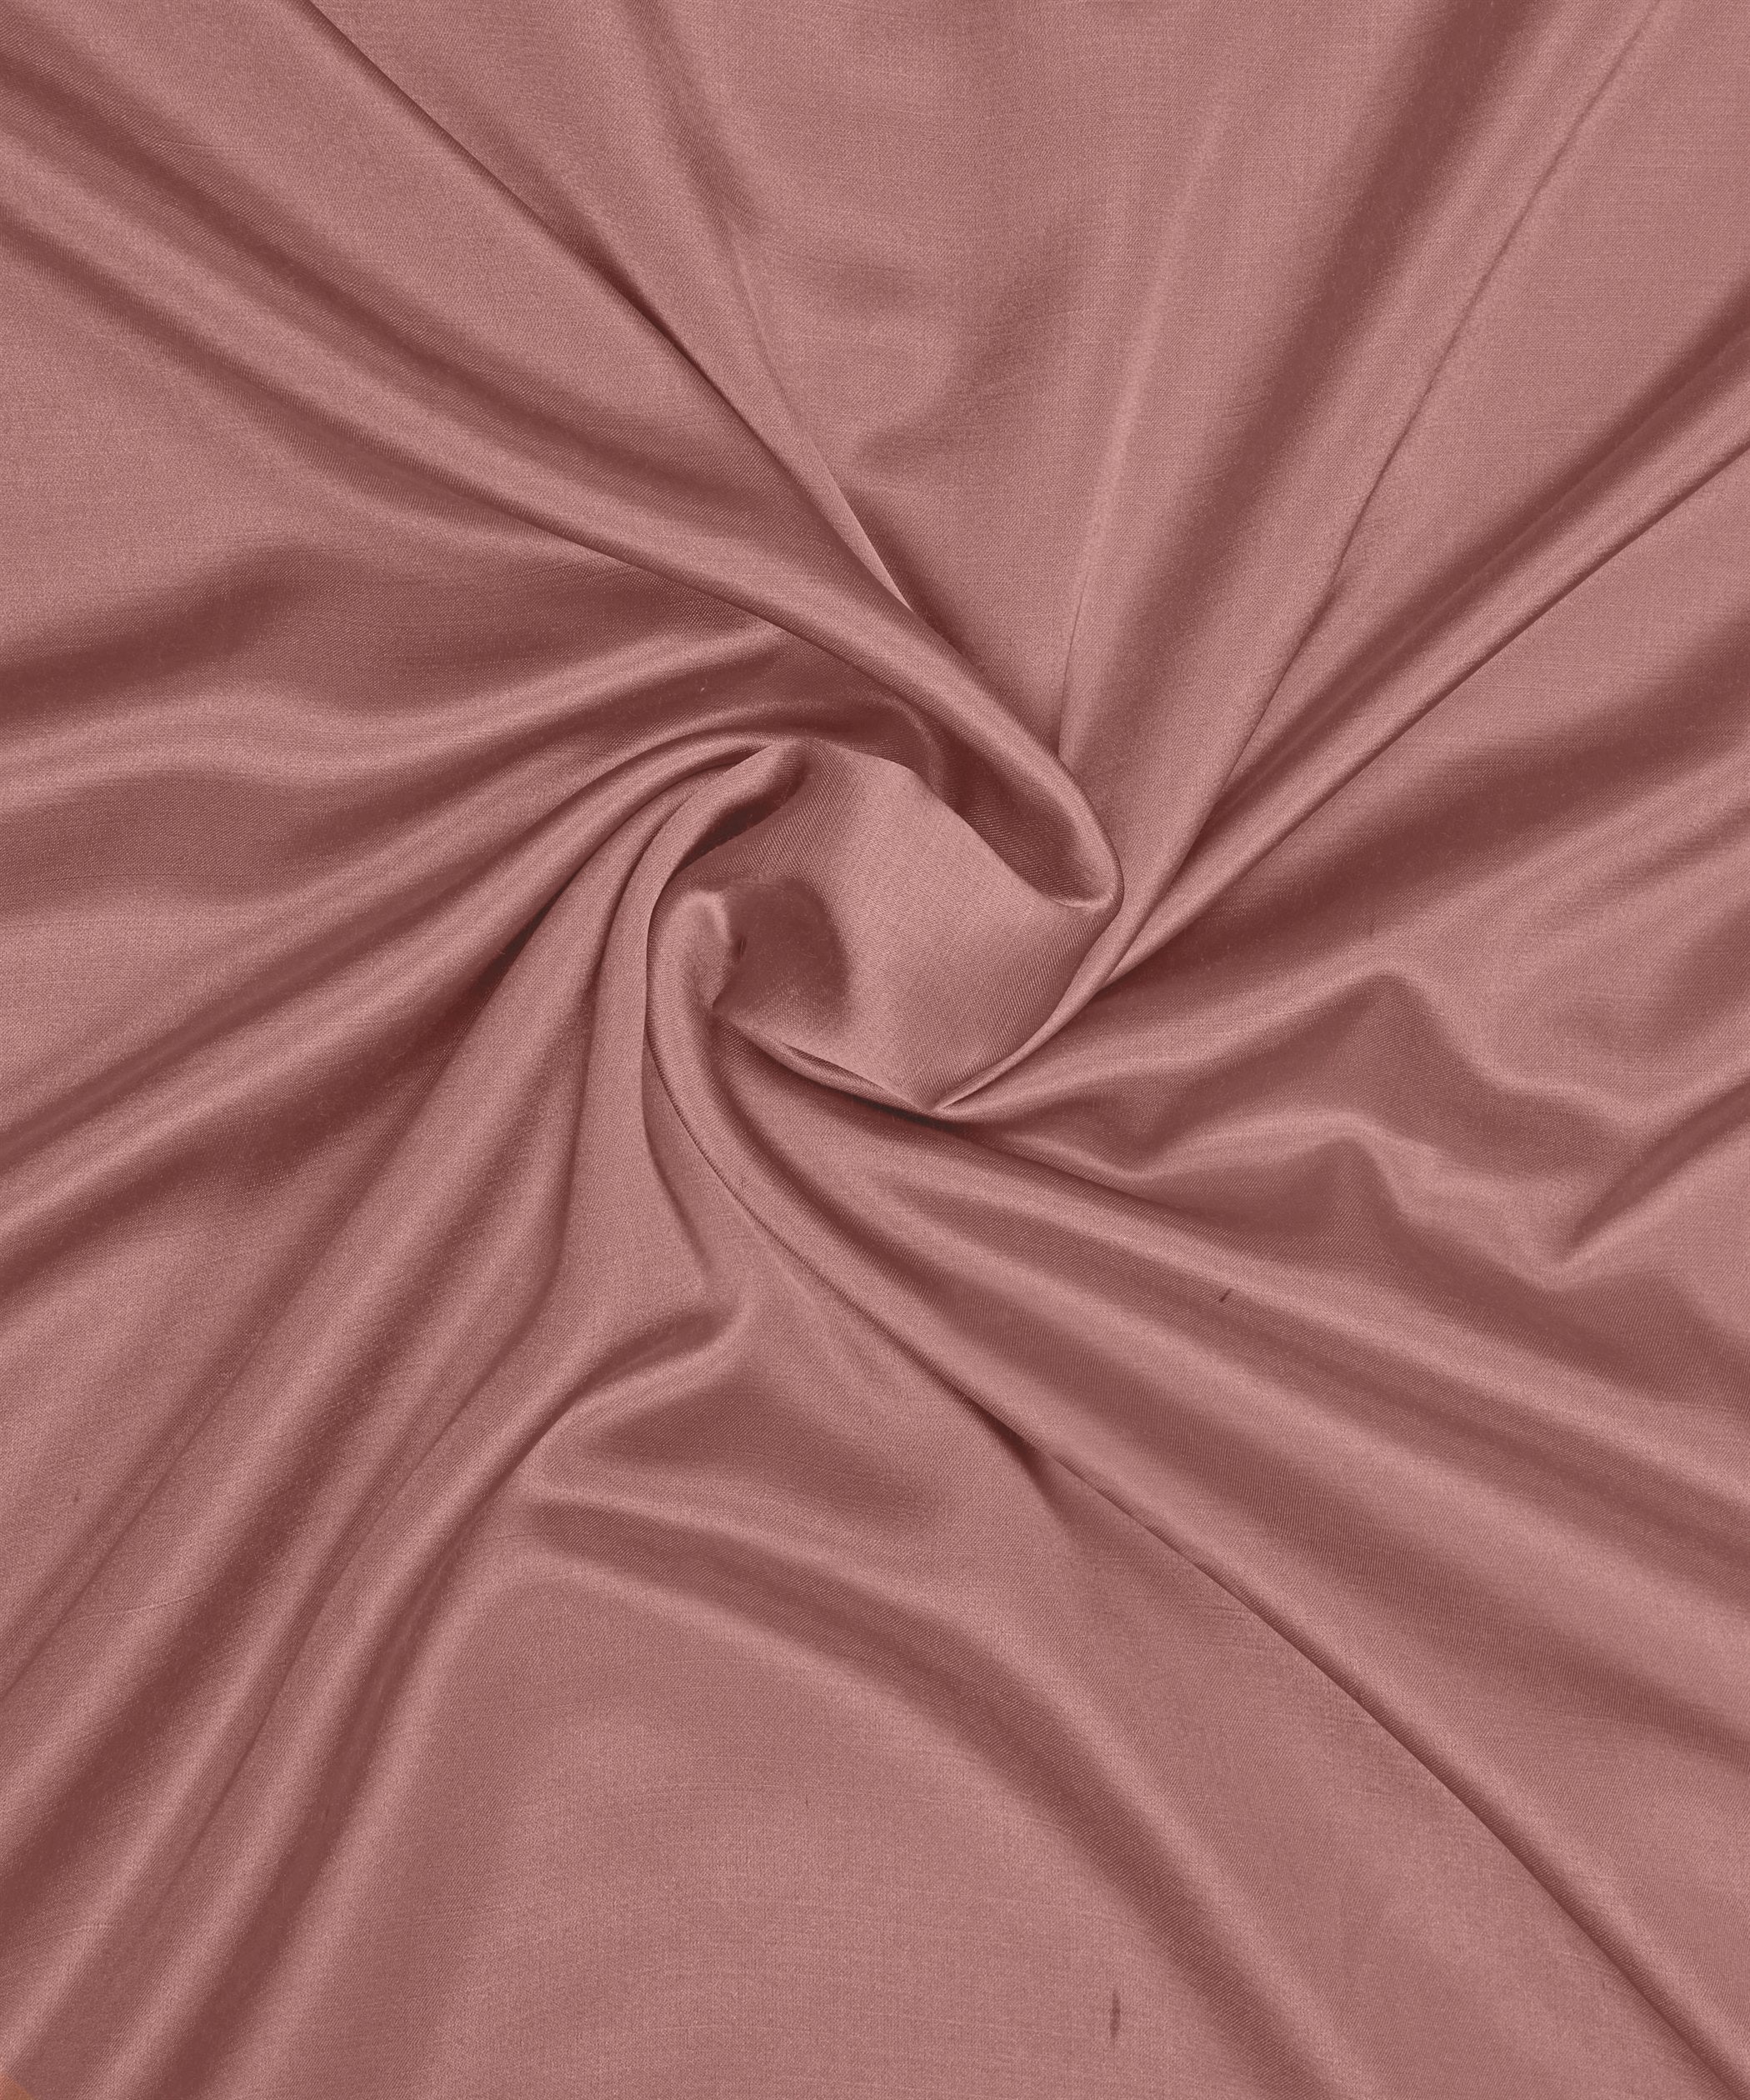 Taupe Brown Plain Dyed Modal Satin Fabric